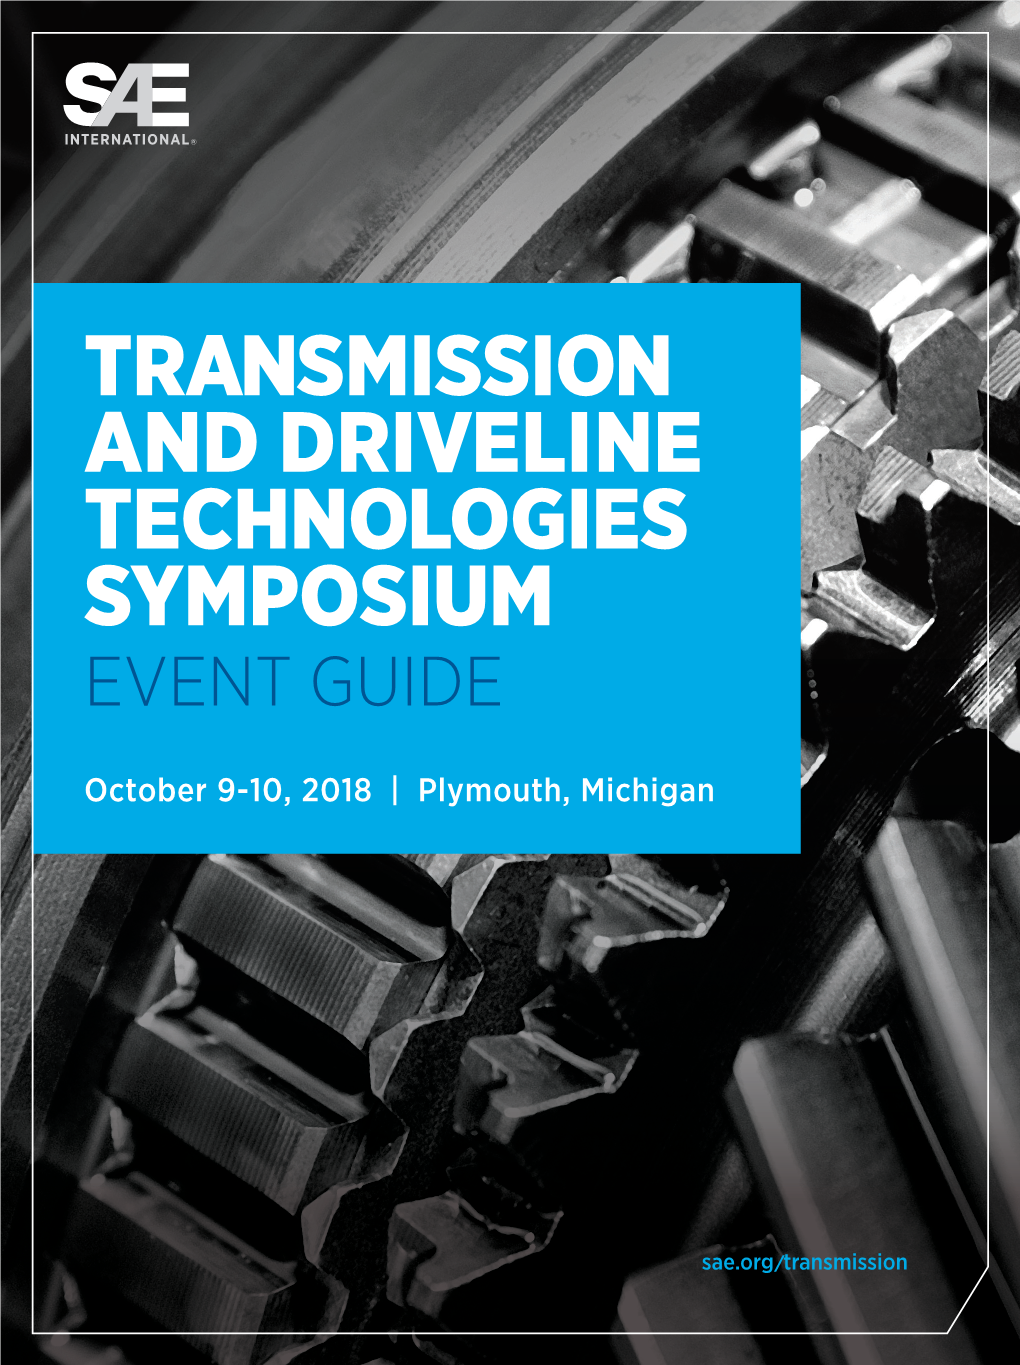 Transmission and Driveline Technologies Symposium Event Guide